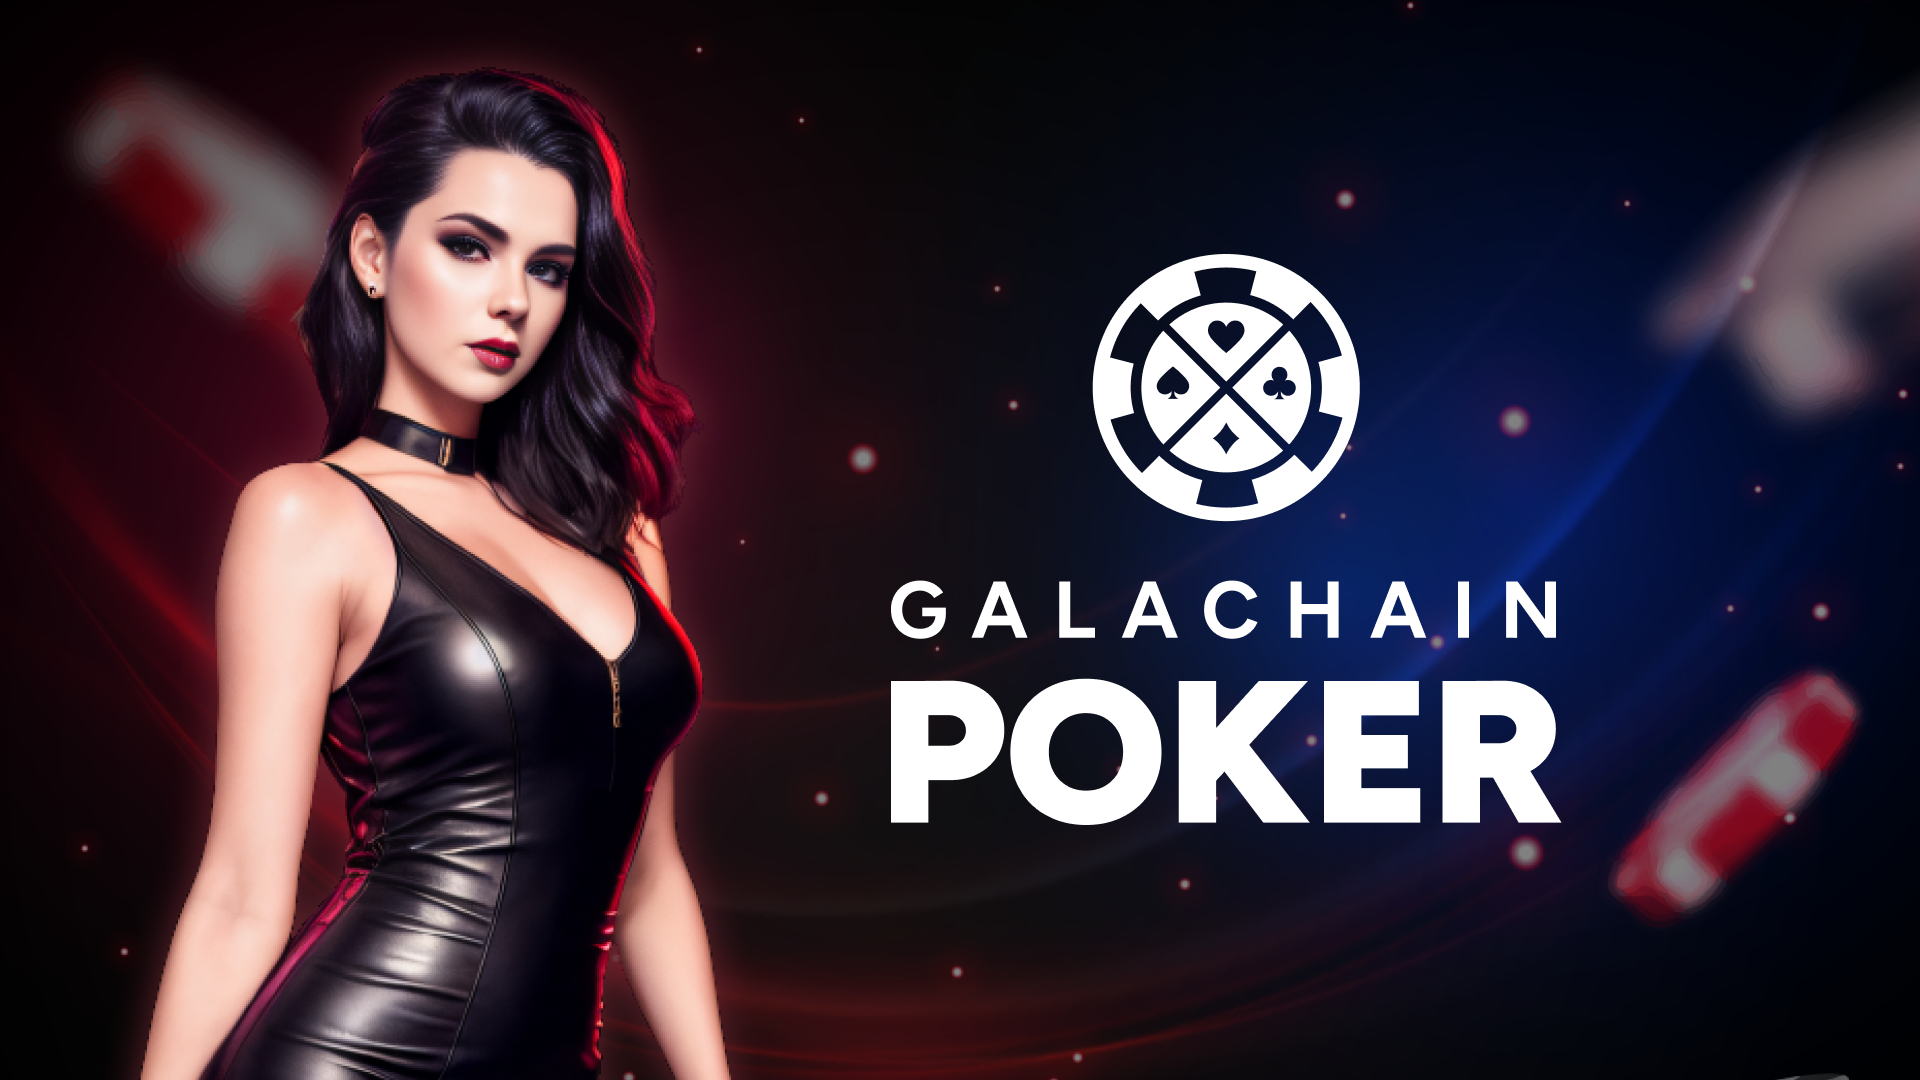 GalaChain Poker is coming to Gala, with new ways to win, a new token called $GCHIP and much more.